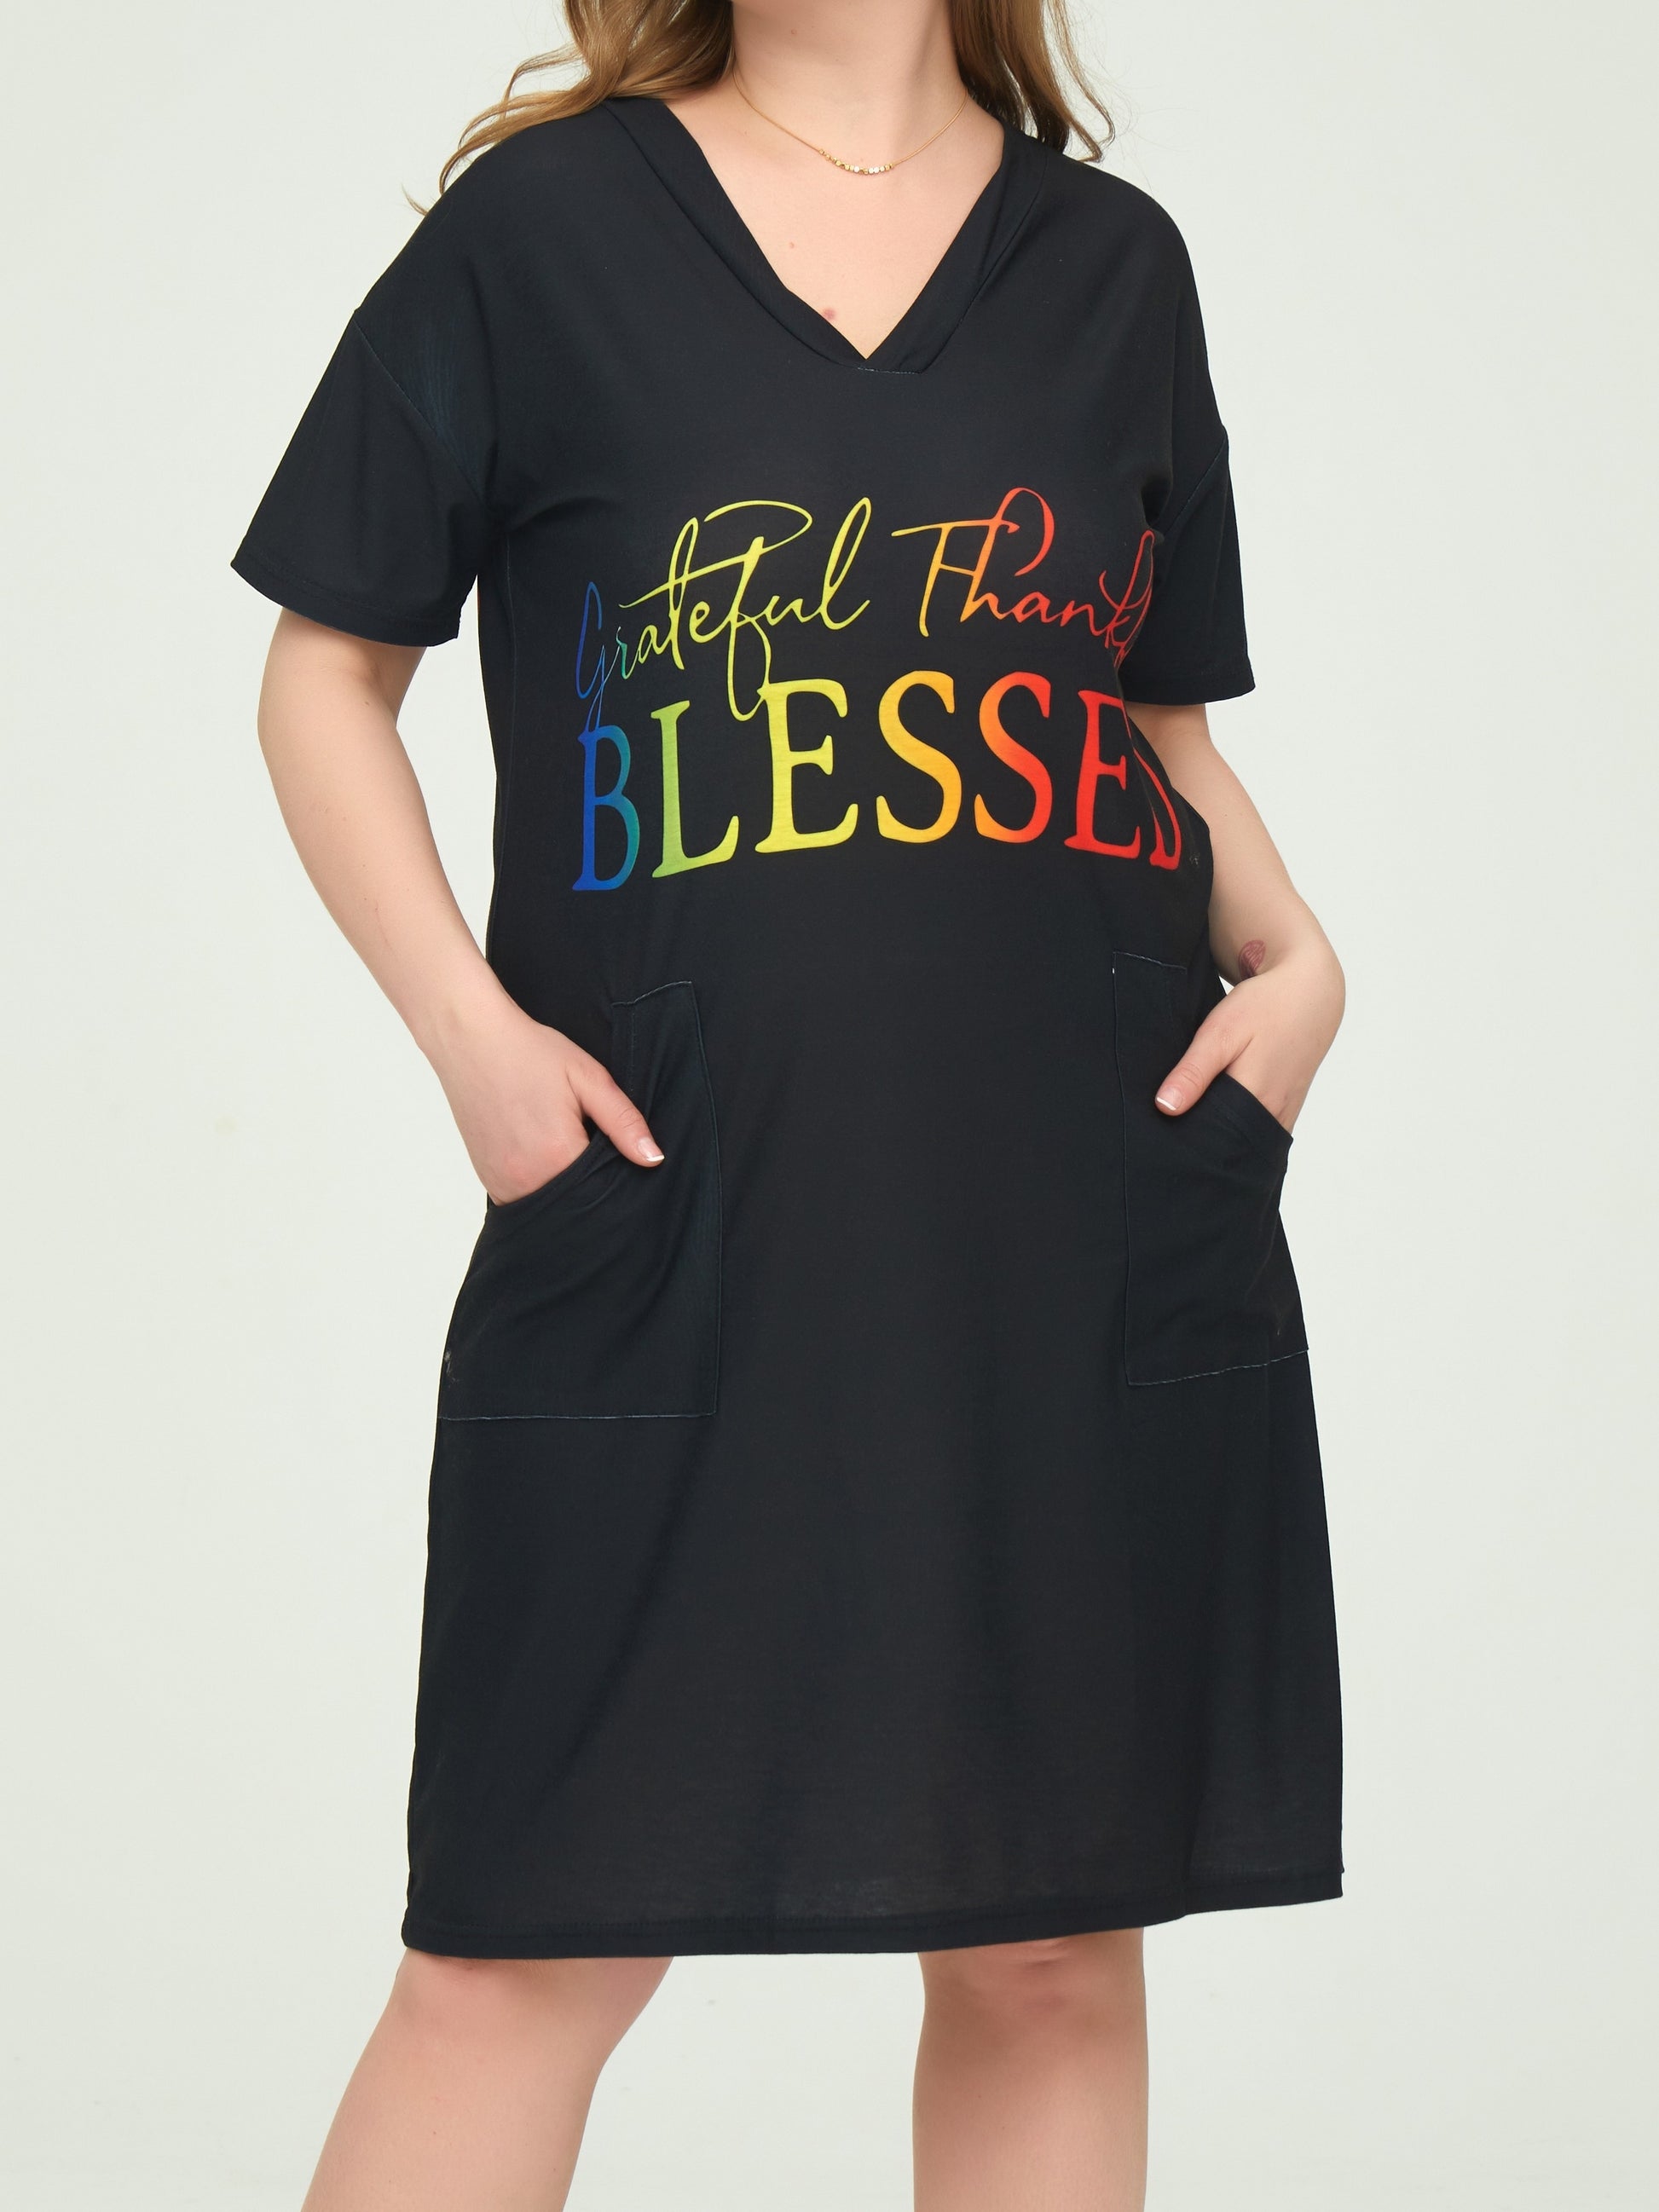 Grateful Thankful Blessed Plus Size Women's Christian Casual Dress claimedbygoddesigns